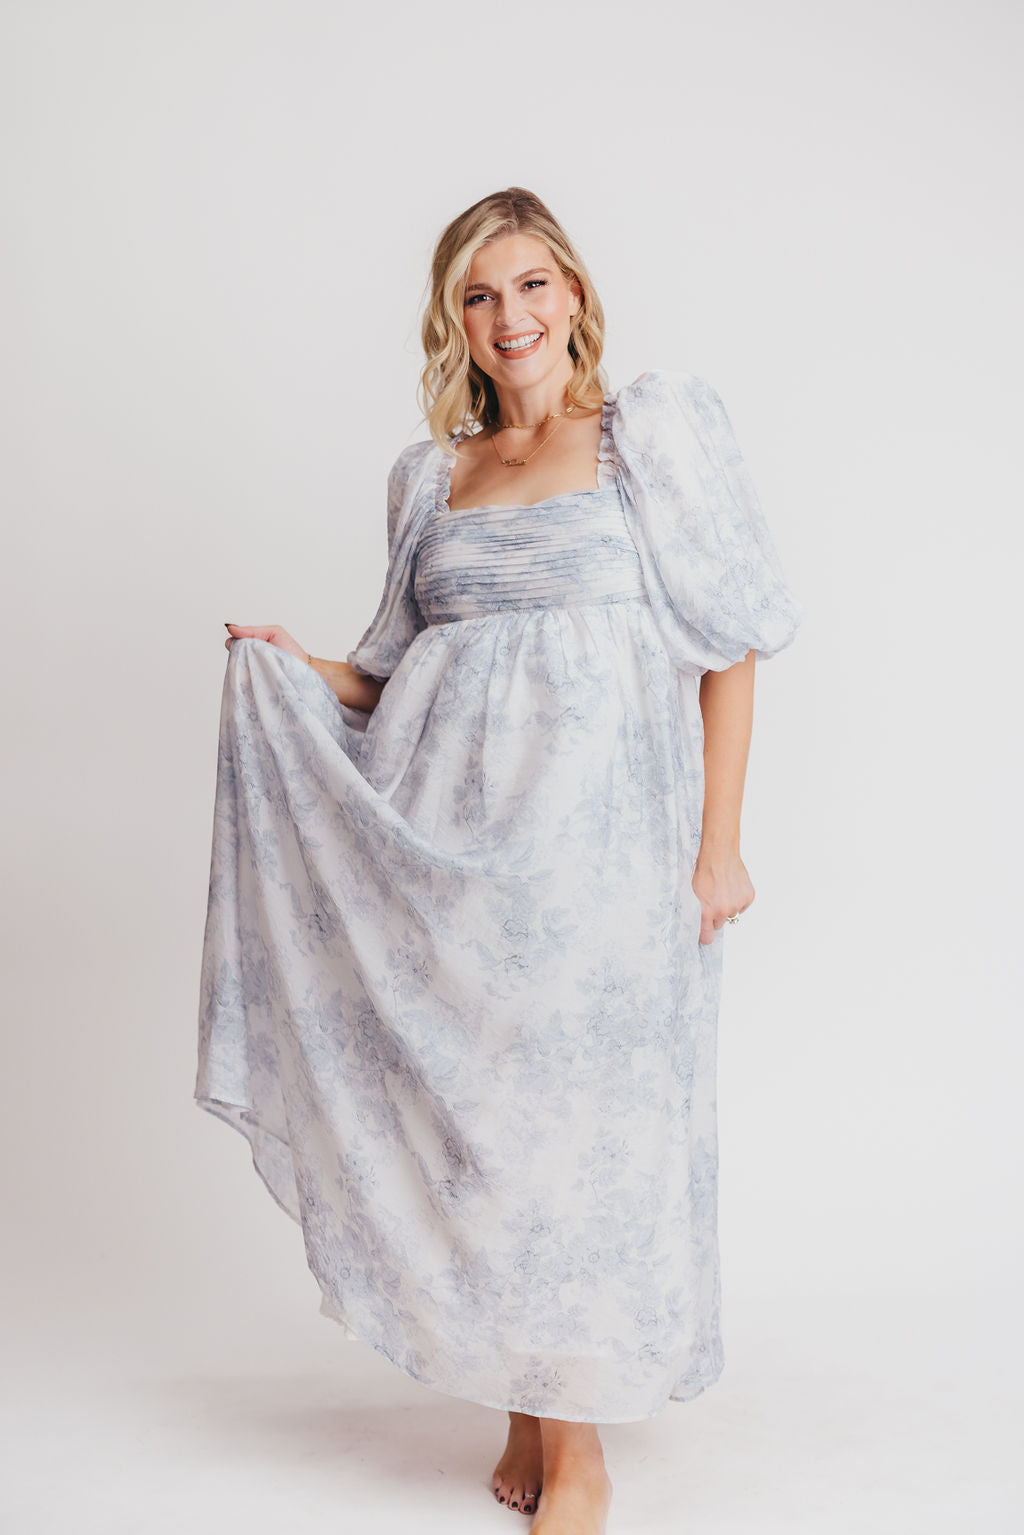 Melody Maxi Dress with Pleats and Bow Detail in Blue Floral - Bump Friendly (swipe to see photos)  & Inclusive Sizing (S-3XL)